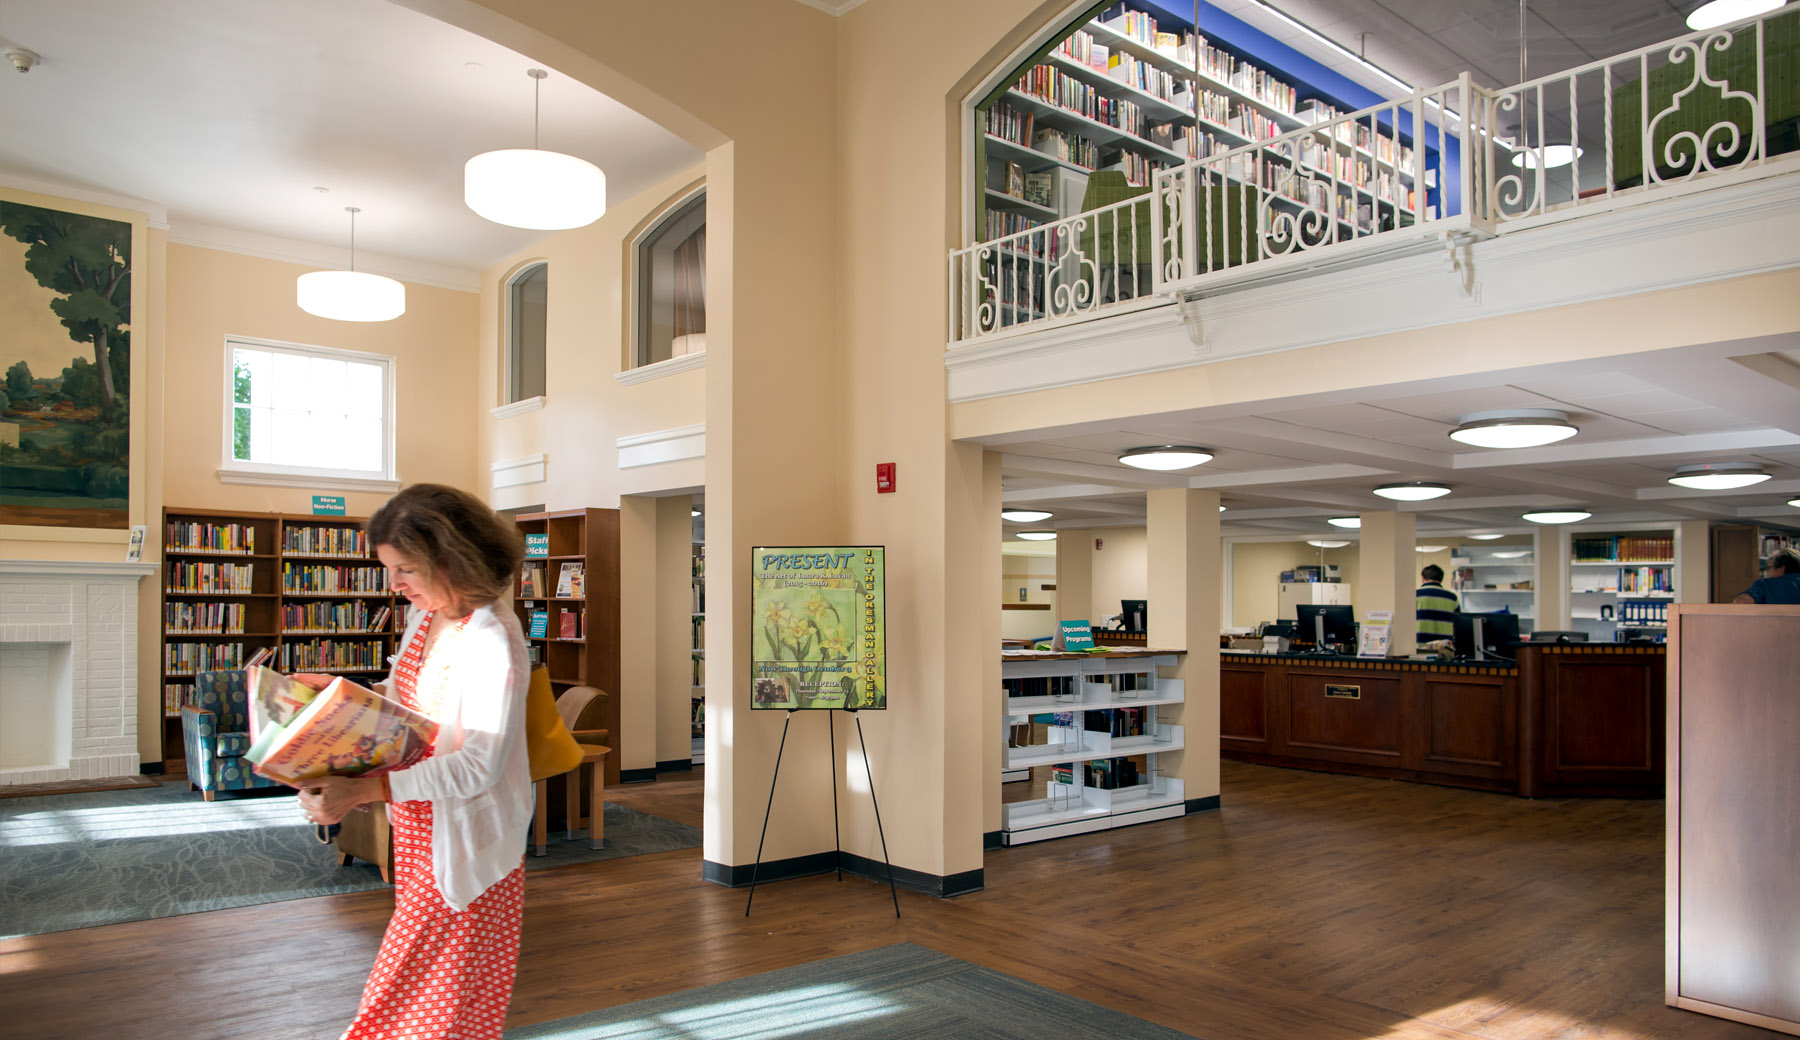 Interior View of Entry (Circulation Desk and Reading Areas):  A completely renovated library provides an appropriately sized circulation desk that is in plain sight of patrons entering the library. Appropriately furnished reading rooms, flanking a center aisle access to the circulation desk, provide comfortable and easily accessible quiet reading areas for adults.